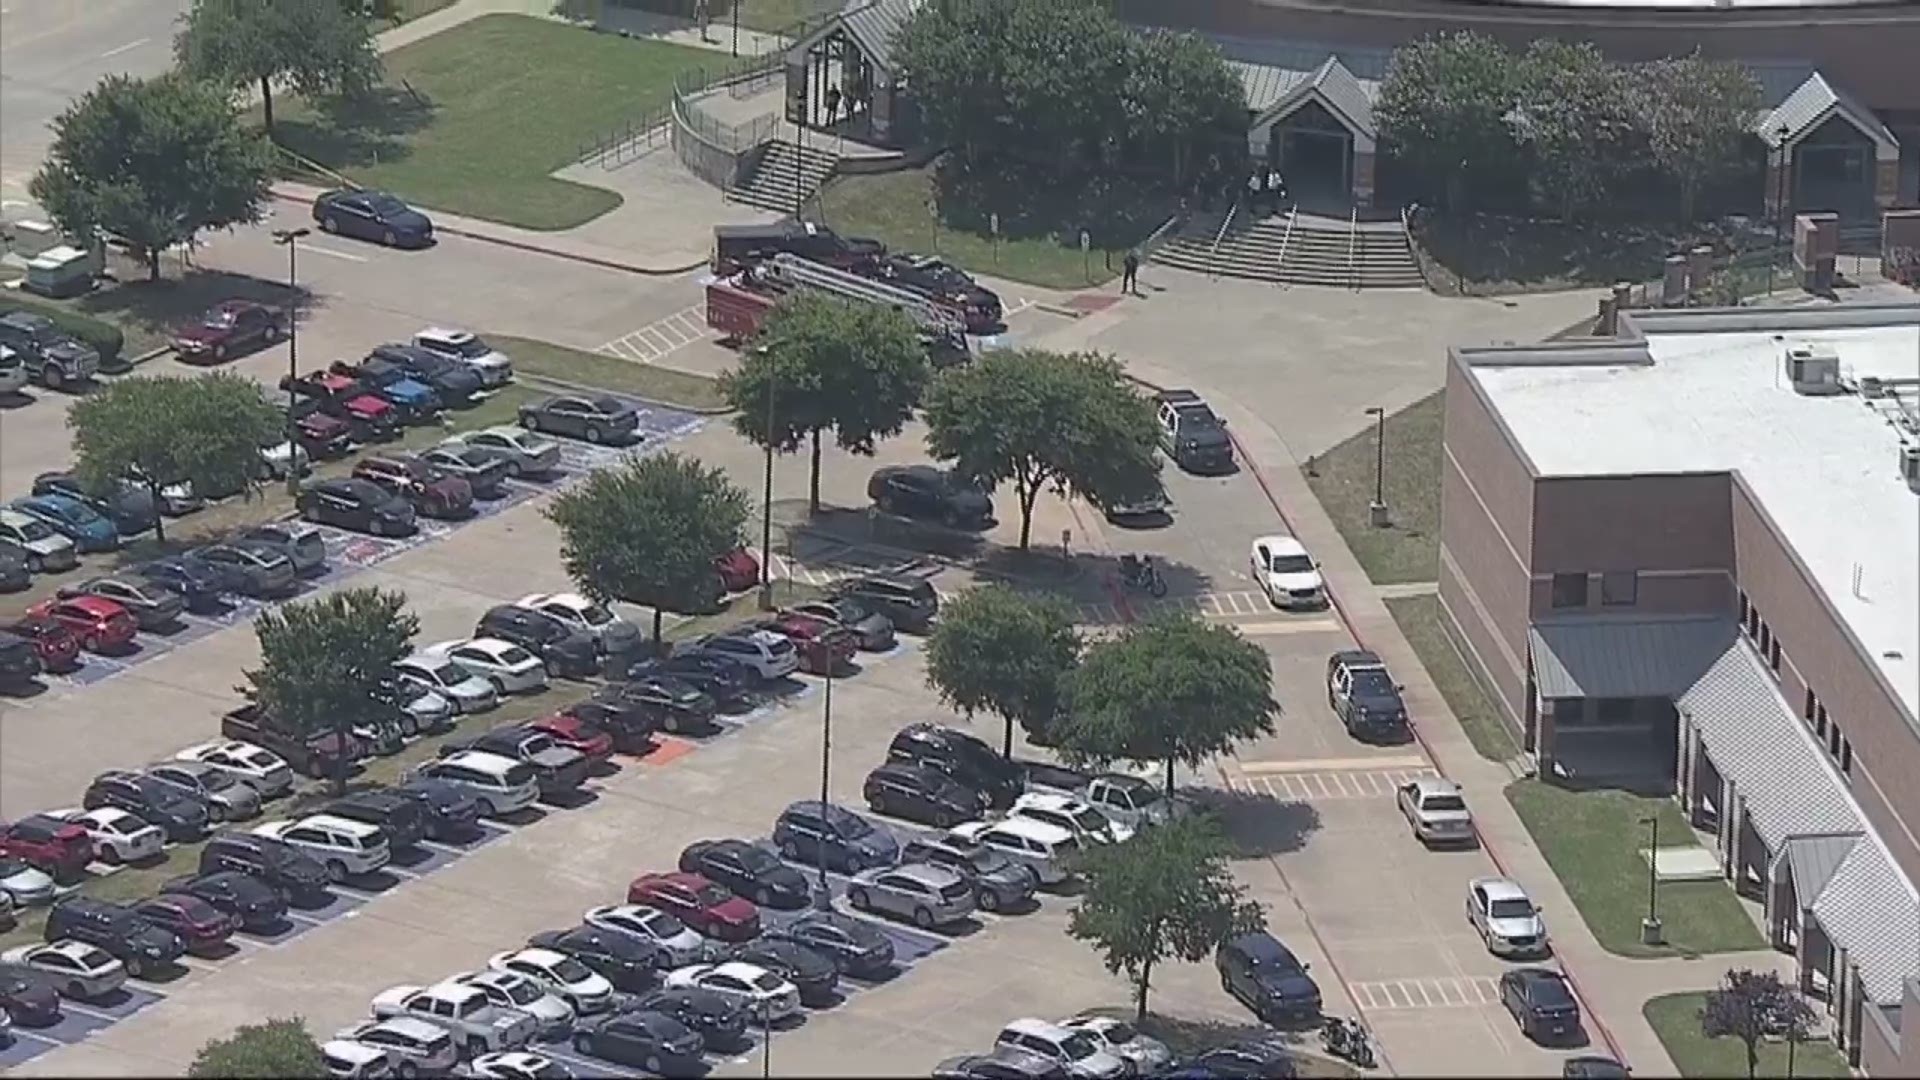 RAW: McKinney North HS under lock down after police say student shot self